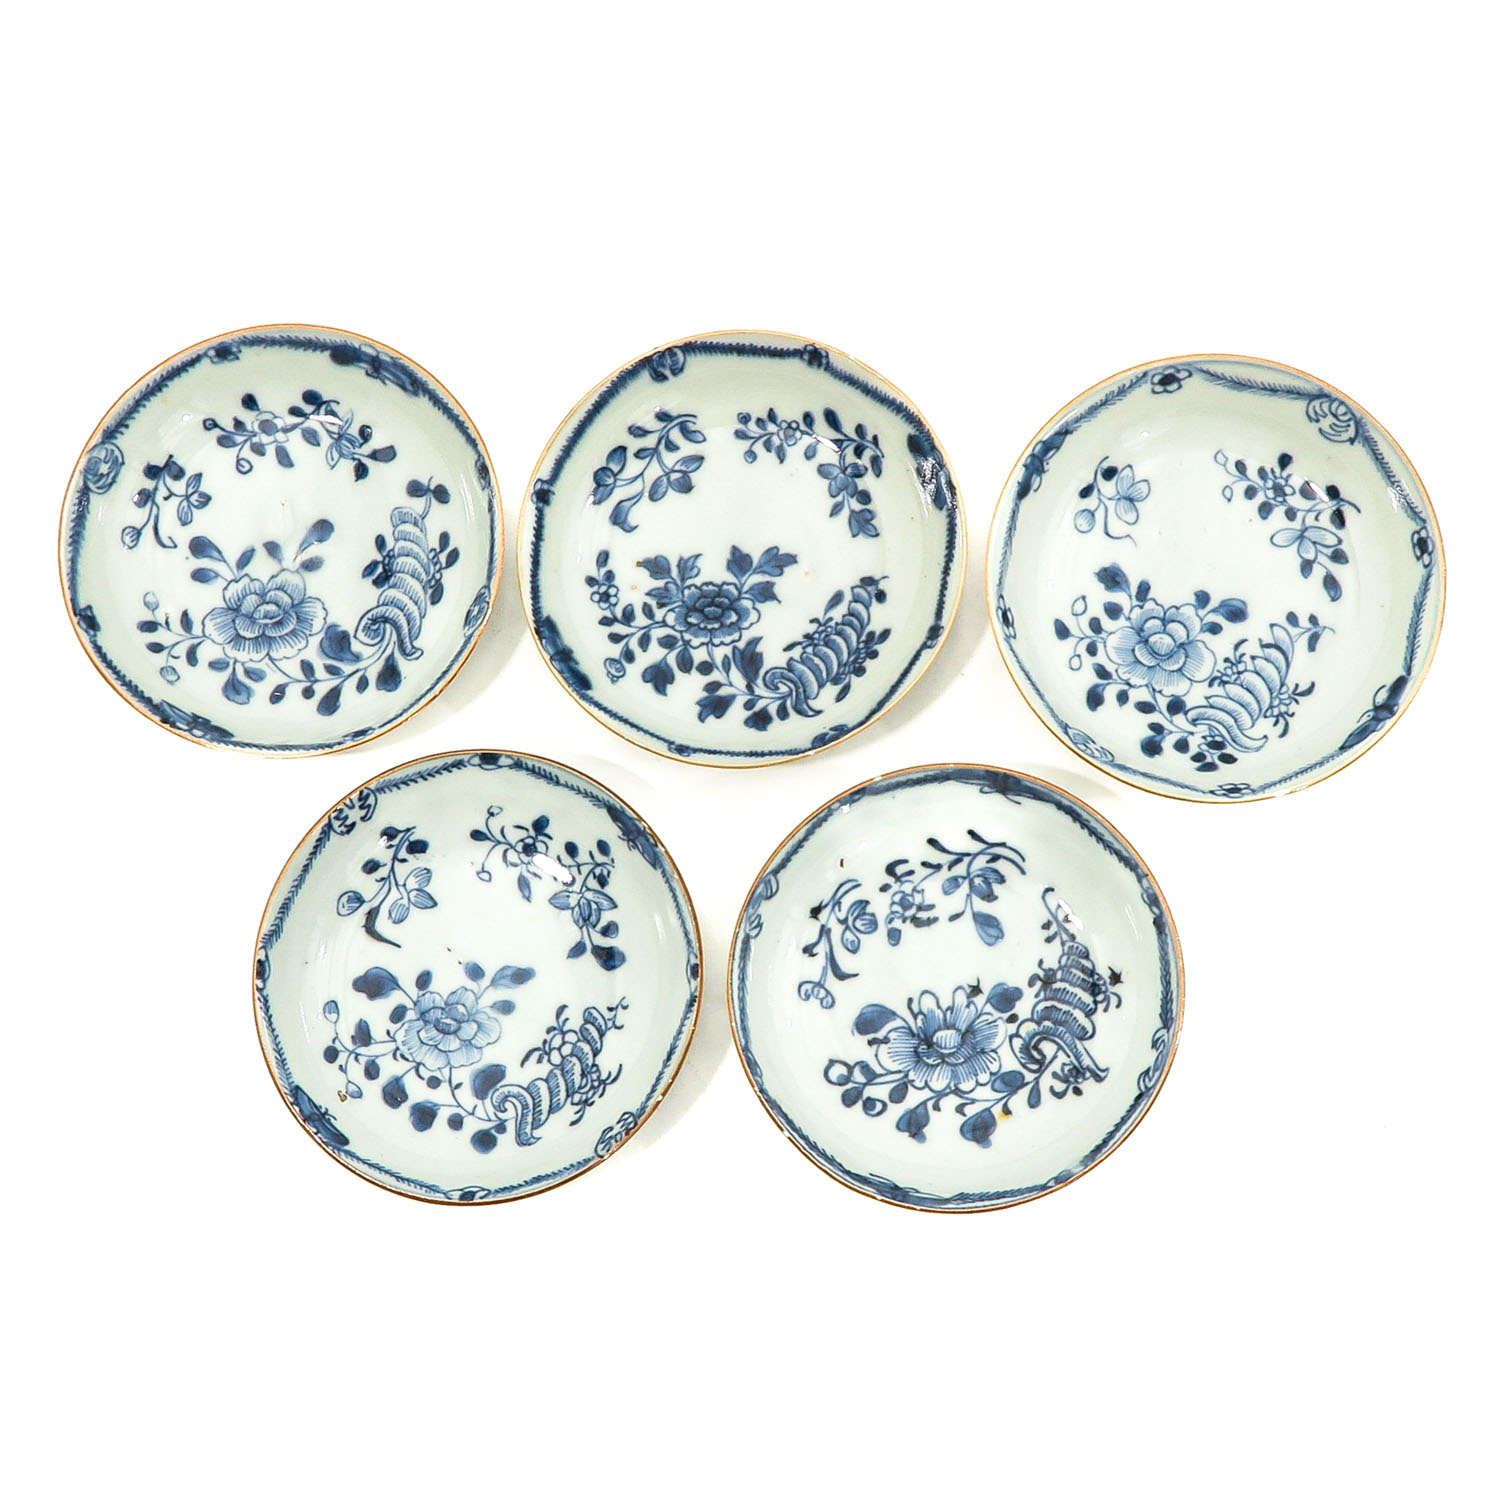 A Collection of 5 Blue and White Cups and Saucers - Image 7 of 10